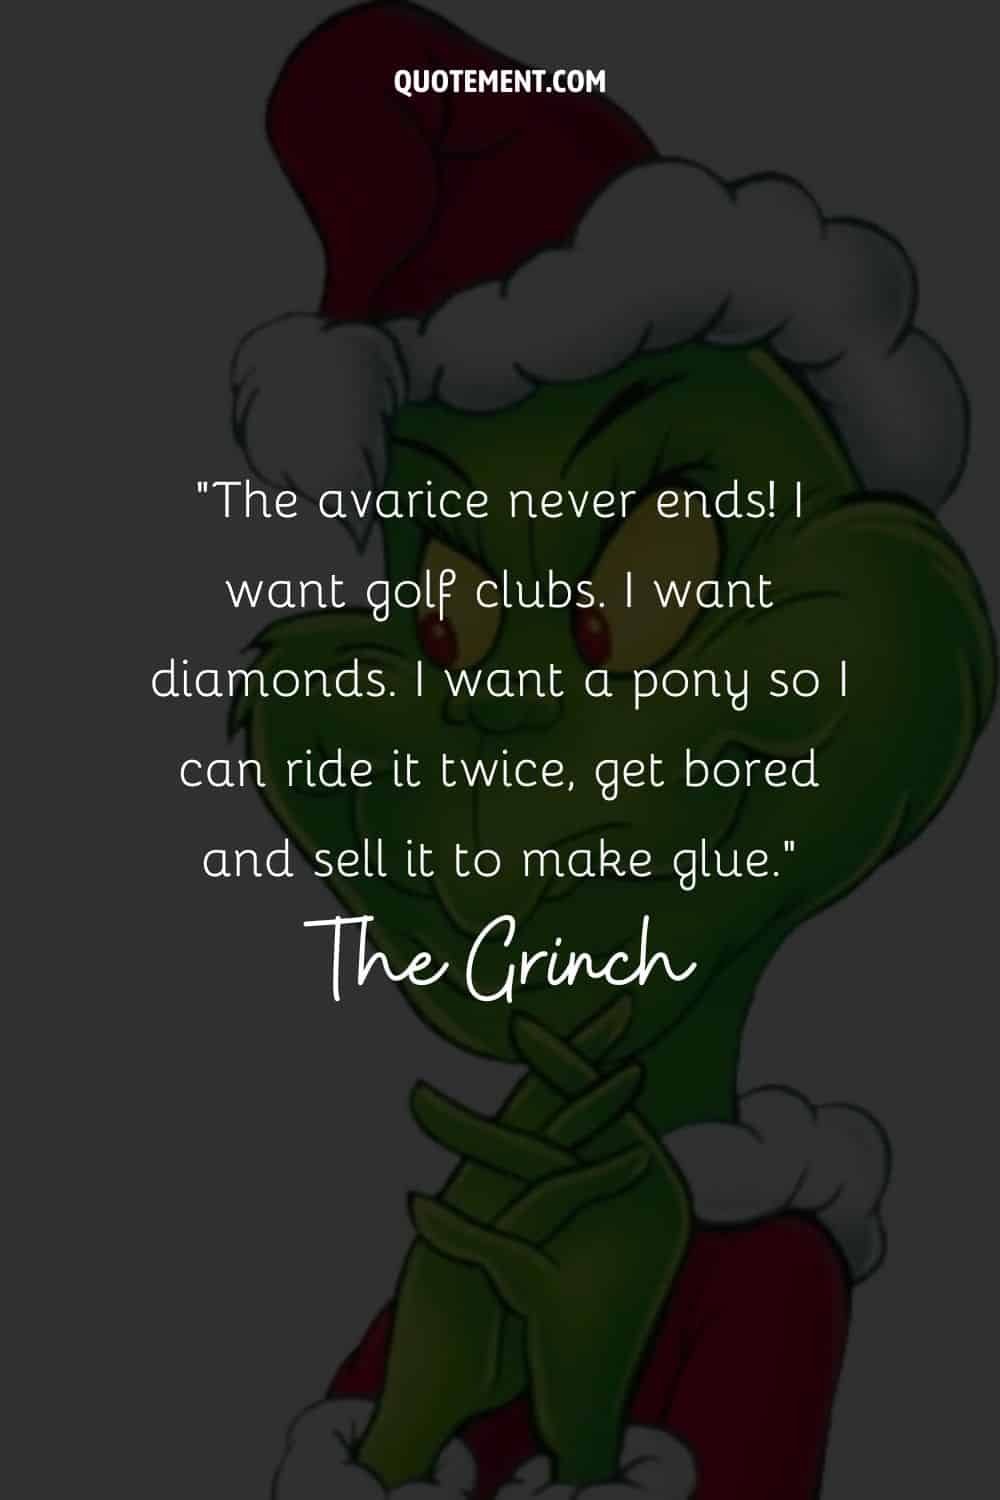 The avarice never ends! I want golf clubs.